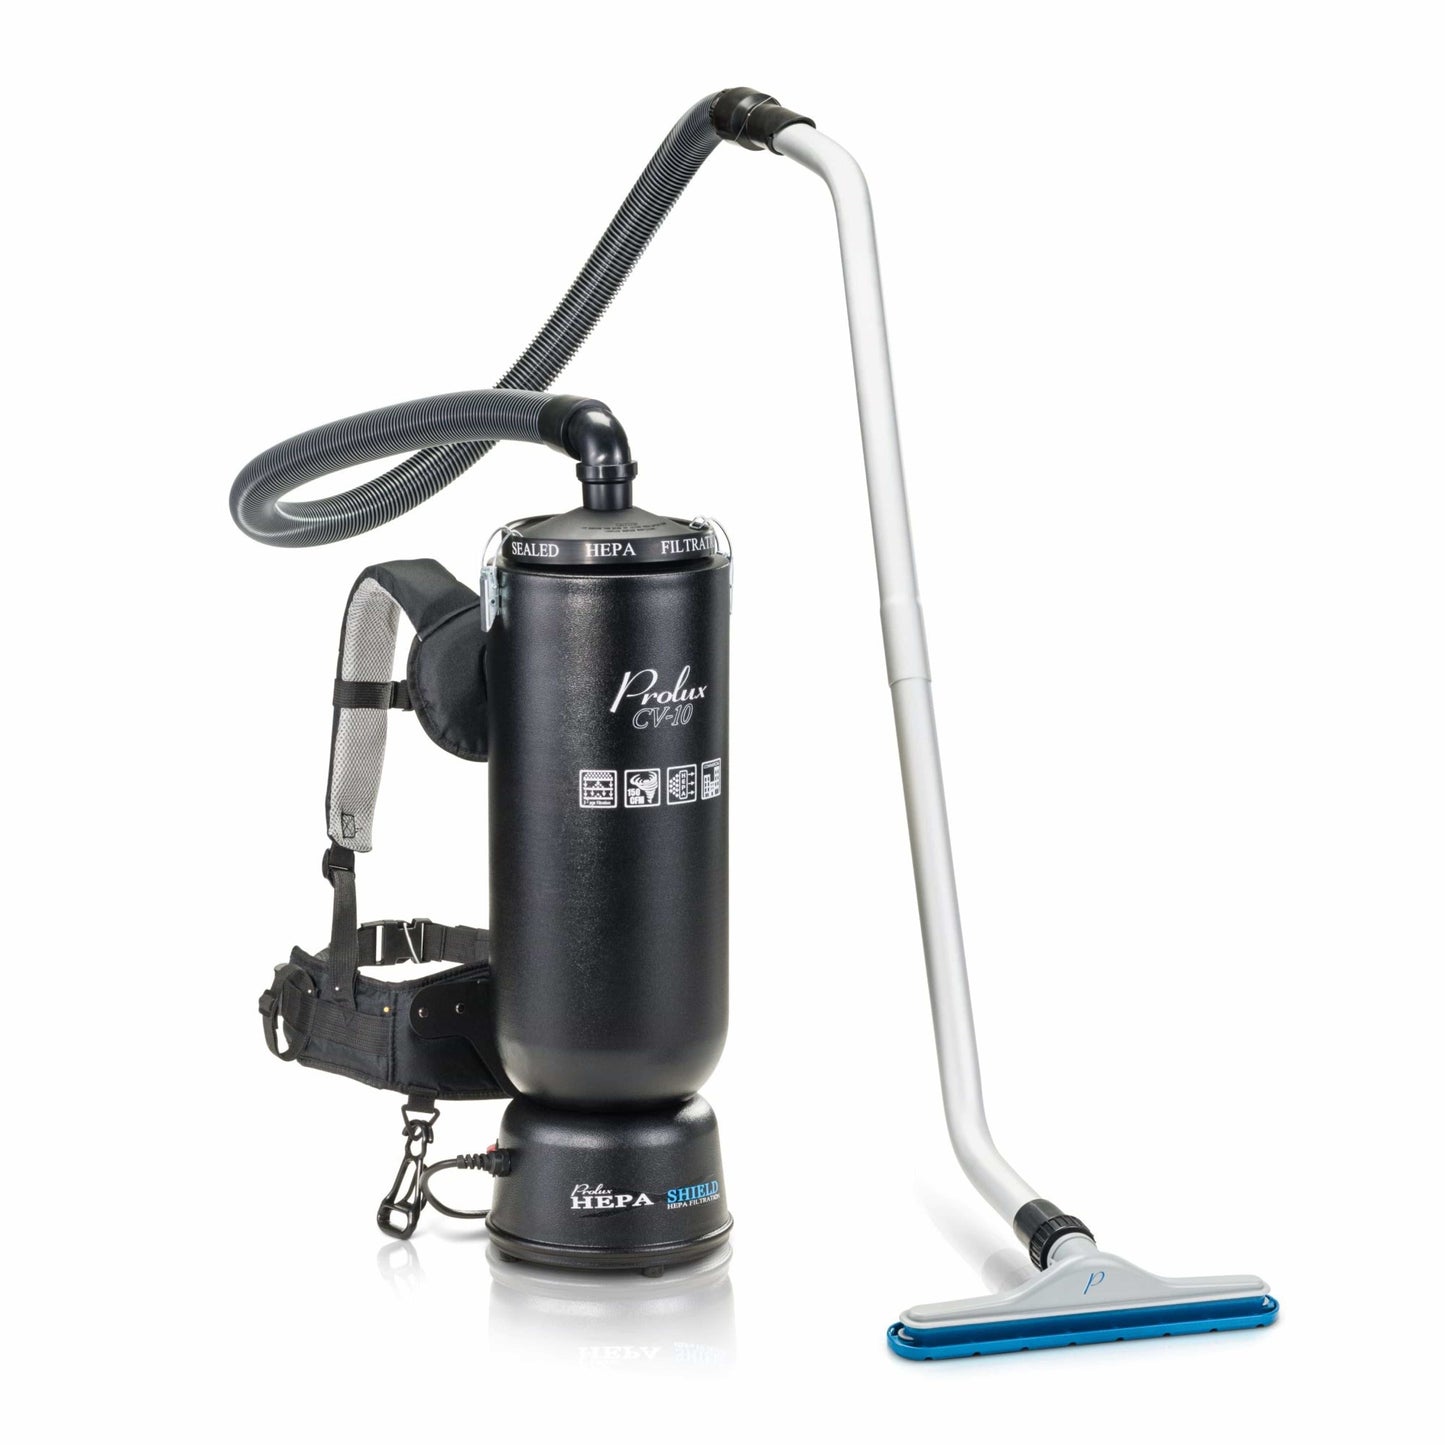 Powerful Lightweight Prolux PLC10 10qt Backpack Vacuum w/ 1 1/2" Tool Kit and 5 YR Warranty